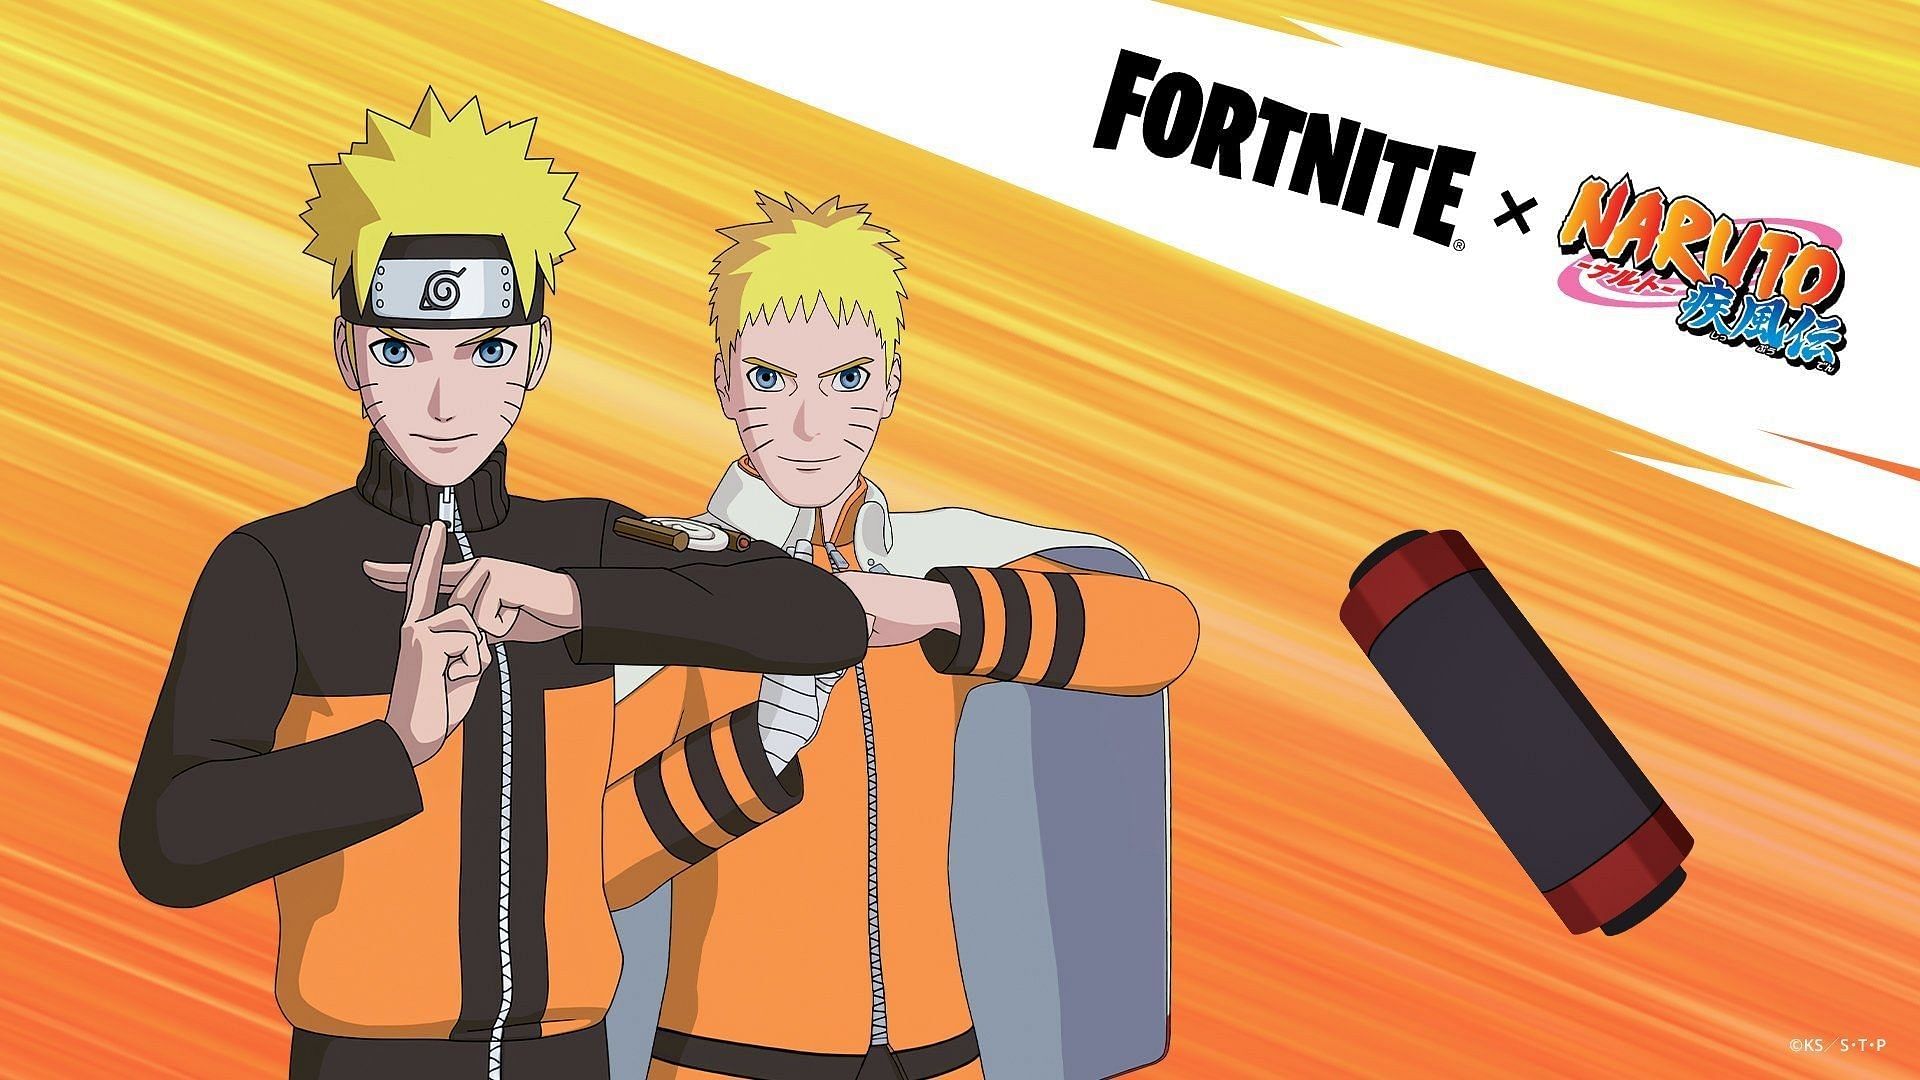 Naruto is another fantastic anime character in Fortnite (Image via Epic Games)